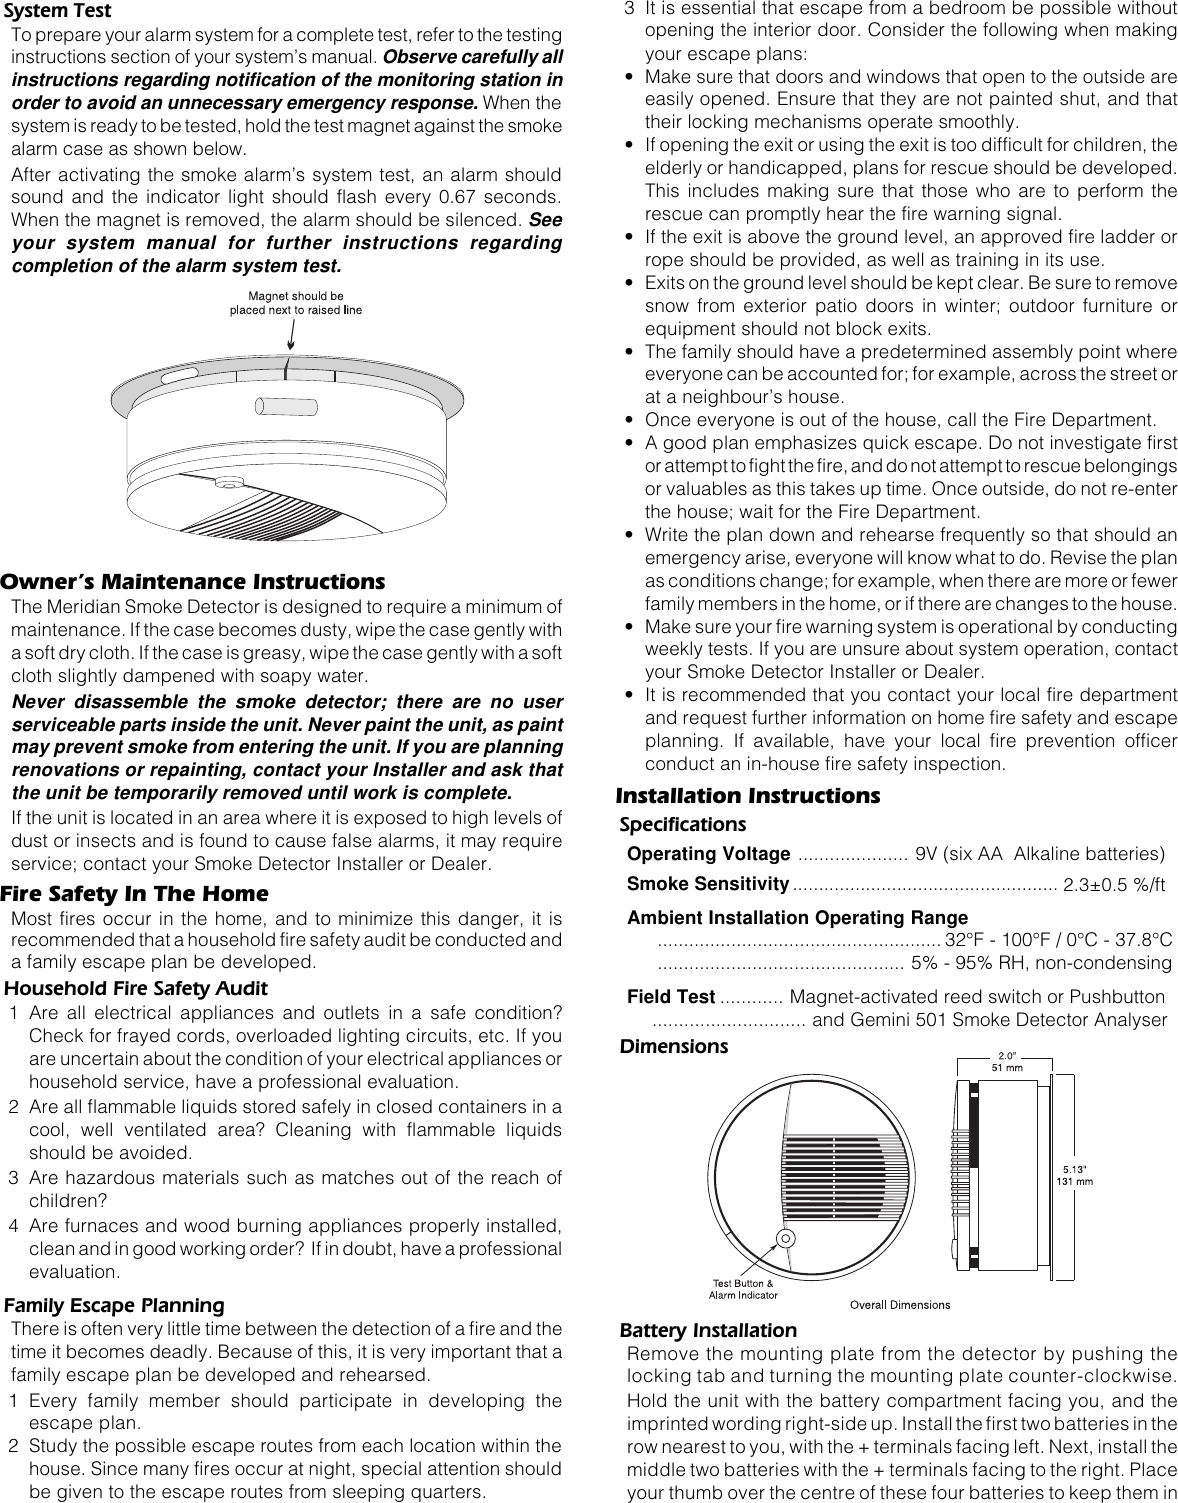 System TestTo prepare your alarm system for a complete test, refer to the testinginstructions section of your system’s manual. Observe carefully allinstructions regarding notification of the monitoring station inorder to avoid an unnecessary emergency response. When thesystem is ready to be tested, hold the test magnet against the smokealarm case as shown below.After activating the smoke alarm’s system test, an alarm shouldsound and the indicator light should flash every 0.67 seconds.When the magnet is removed, the alarm should be silenced. Seeyour system manual for further instructions regardingcompletion of the alarm system test.Owner’s Maintenance InstructionsThe Meridian Smoke Detector is designed to require a minimum ofmaintenance. If the case becomes dusty, wipe the case gently witha soft dry cloth. If the case is greasy, wipe the case gently with a softcloth slightly dampened with soapy water.Never disassemble the smoke detector; there are no userserviceable parts inside the unit. Never paint the unit, as paintmay prevent smoke from entering the unit. If you are planningrenovations or repainting, contact your Installer and ask thatthe unit be temporarily removed until work is complete.If the unit is located in an area where it is exposed to high levels ofdust or insects and is found to cause false alarms, it may requireservice; contact your Smoke Detector Installer or Dealer.Fire Safety In The HomeMost fires occur in the home, and to minimize this danger, it isrecommended that a household fire safety audit be conducted anda family escape plan be developed.Household Fire Safety Audit1 Are all electrical appliances and outlets in a safe condition?Check for frayed cords, overloaded lighting circuits, etc. If youare uncertain about the condition of your electrical appliances orhousehold service, have a professional evaluation.2 Are all flammable liquids stored safely in closed containers in acool, well ventilated area? Cleaning with flammable liquidsshould be avoided.3 Are hazardous materials such as matches out of the reach ofchildren?4 Are furnaces and wood burning appliances properly installed,clean and in good working order?  If in doubt, have a professionalevaluation.Family Escape PlanningThere is often very little time between the detection of a fire and thetime it becomes deadly. Because of this, it is very important that afamily escape plan be developed and rehearsed.1 Every family member should participate in developing theescape plan.2 Study the possible escape routes from each location within thehouse. Since many fires occur at night, special attention shouldbe given to the escape routes from sleeping quarters.3 It is essential that escape from a bedroom be possible withoutopening the interior door. Consider the following when makingyour escape plans:• Make sure that doors and windows that open to the outside areeasily opened. Ensure that they are not painted shut, and thattheir locking mechanisms operate smoothly.• If opening the exit or using the exit is too difficult for children, theelderly or handicapped, plans for rescue should be developed.This includes making sure that those who are to perform therescue can promptly hear the fire warning signal.• If the exit is above the ground level, an approved fire ladder orrope should be provided, as well as training in its use.• Exits on the ground level should be kept clear. Be sure to removesnow from exterior patio doors in winter; outdoor furniture orequipment should not block exits.• The family should have a predetermined assembly point whereeveryone can be accounted for; for example, across the street orat a neighbour’s house.• Once everyone is out of the house, call the Fire Department.• A good plan emphasizes quick escape. Do not investigate firstor attempt to fight the fire, and do not attempt to rescue belongingsor valuables as this takes up time. Once outside, do not re-enterthe house; wait for the Fire Department.• Write the plan down and rehearse frequently so that should anemergency arise, everyone will know what to do. Revise the planas conditions change; for example, when there are more or fewerfamily members in the home, or if there are changes to the house.• Make sure your fire warning system is operational by conductingweekly tests. If you are unsure about system operation, contactyour Smoke Detector Installer or Dealer.• It is recommended that you contact your local fire departmentand request further information on home fire safety and escapeplanning. If available, have your local fire prevention officerconduct an in-house fire safety inspection.Installation InstructionsSpecificationsOperating Voltage ..................... 9V (six AA  Alkaline batteries)Smoke Sensitivity................................................... 2.3±0.5 %/ftAmbient Installation Operating Range...................................................... 32°F - 100°F / 0°C - 37.8°C............................................... 5% - 95% RH, non-condensingField Test ............ Magnet-activated reed switch or Pushbutton............................. and Gemini 501 Smoke Detector AnalyserDimensionsBattery InstallationRemove the mounting plate from the detector by pushing thelocking tab and turning the mounting plate counter-clockwise.Hold the unit with the battery compartment facing you, and theimprinted wording right-side up. Install the first two batteries in therow nearest to you, with the + terminals facing left. Next, install themiddle two batteries with the + terminals facing to the right. Placeyour thumb over the centre of these four batteries to keep them in